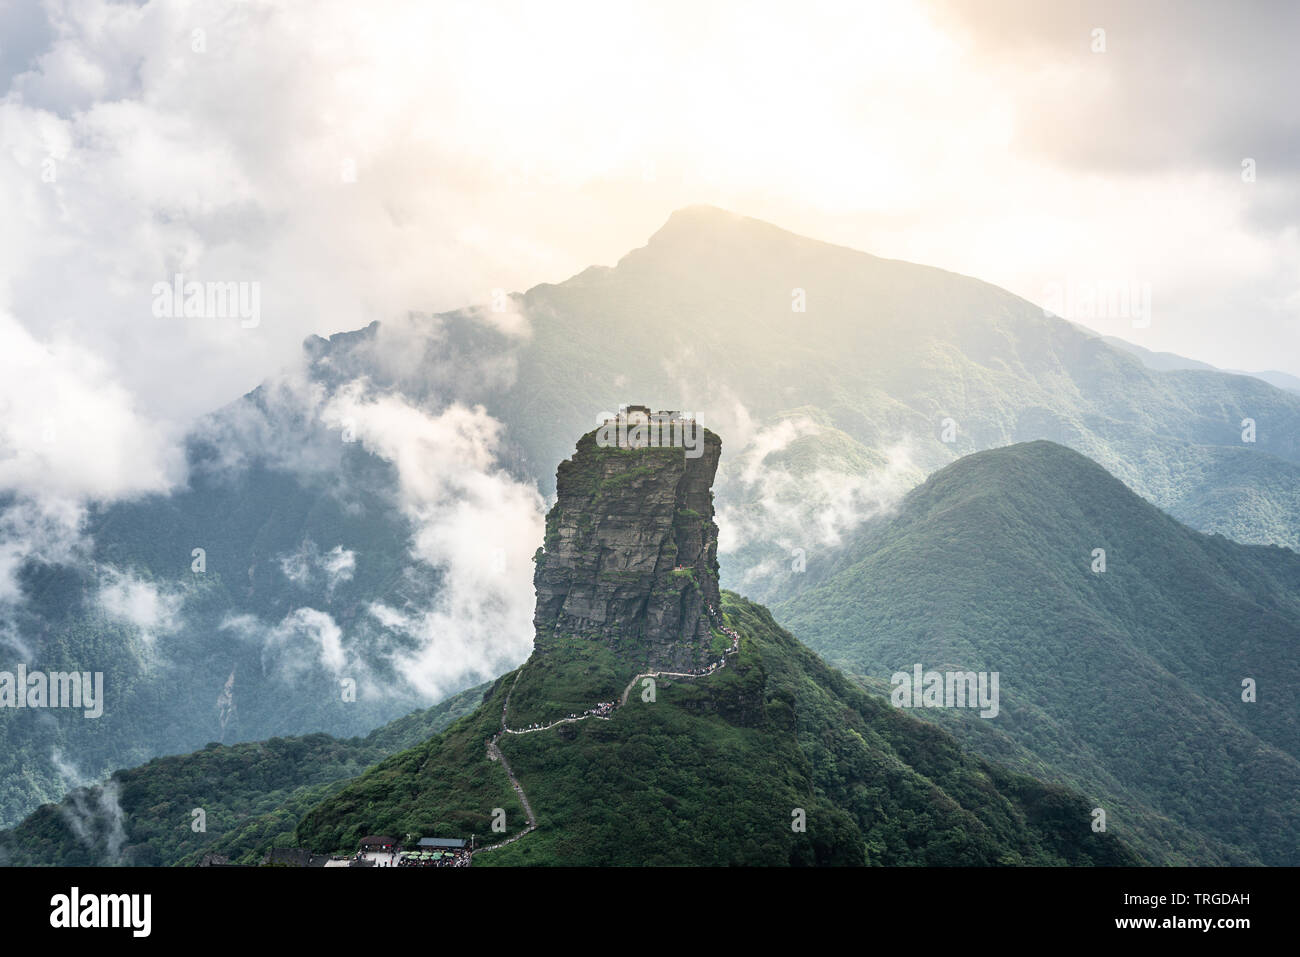 Sunset scenery in Fanjingshan mountain with view of the Fanjing mount and the red cloud golden peak with Buddhist temple on the top in Guizhou China Stock Photo